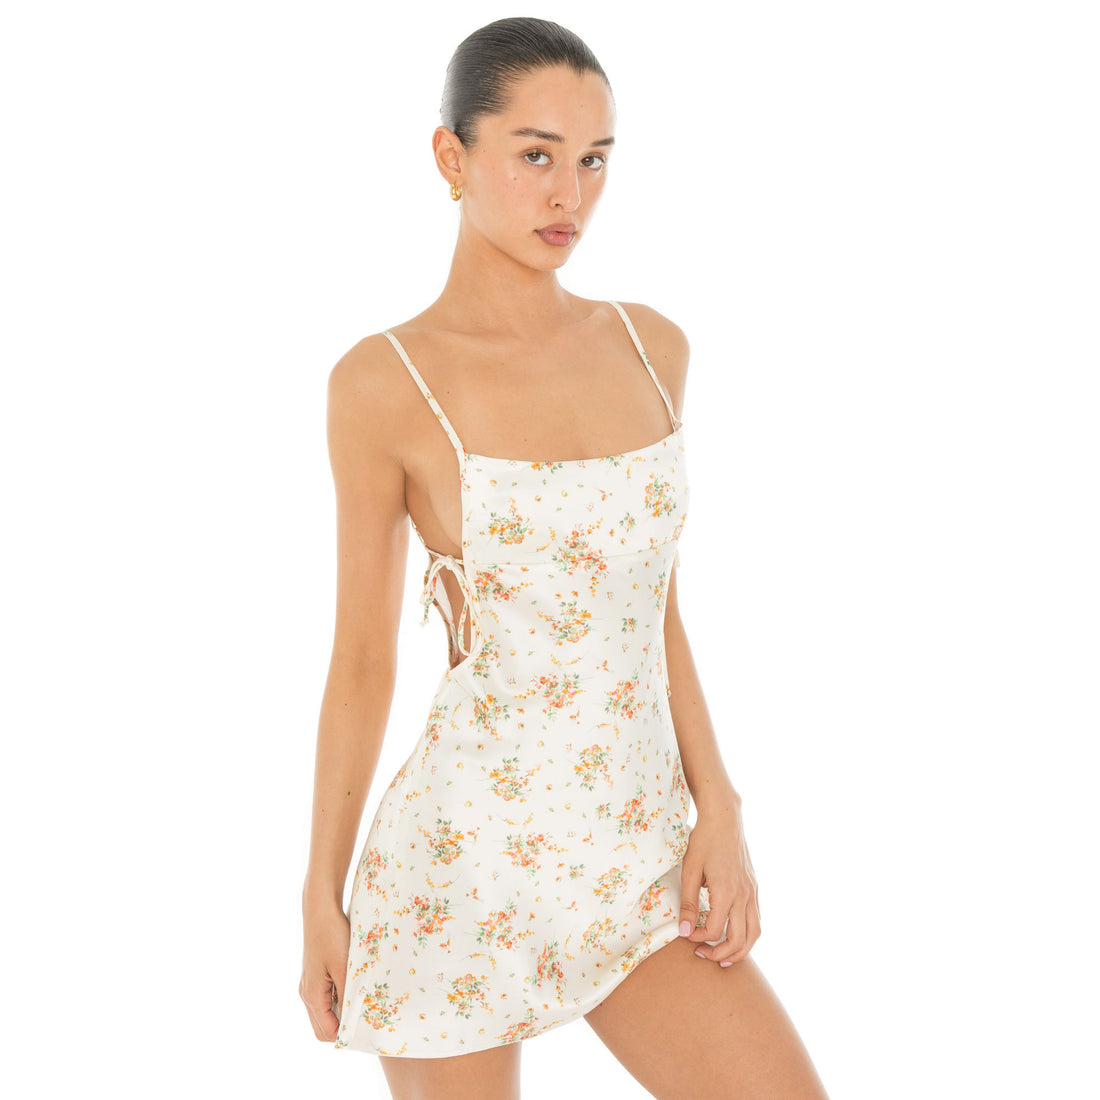 Are You Am I - Seraph Floral Dress **ivory